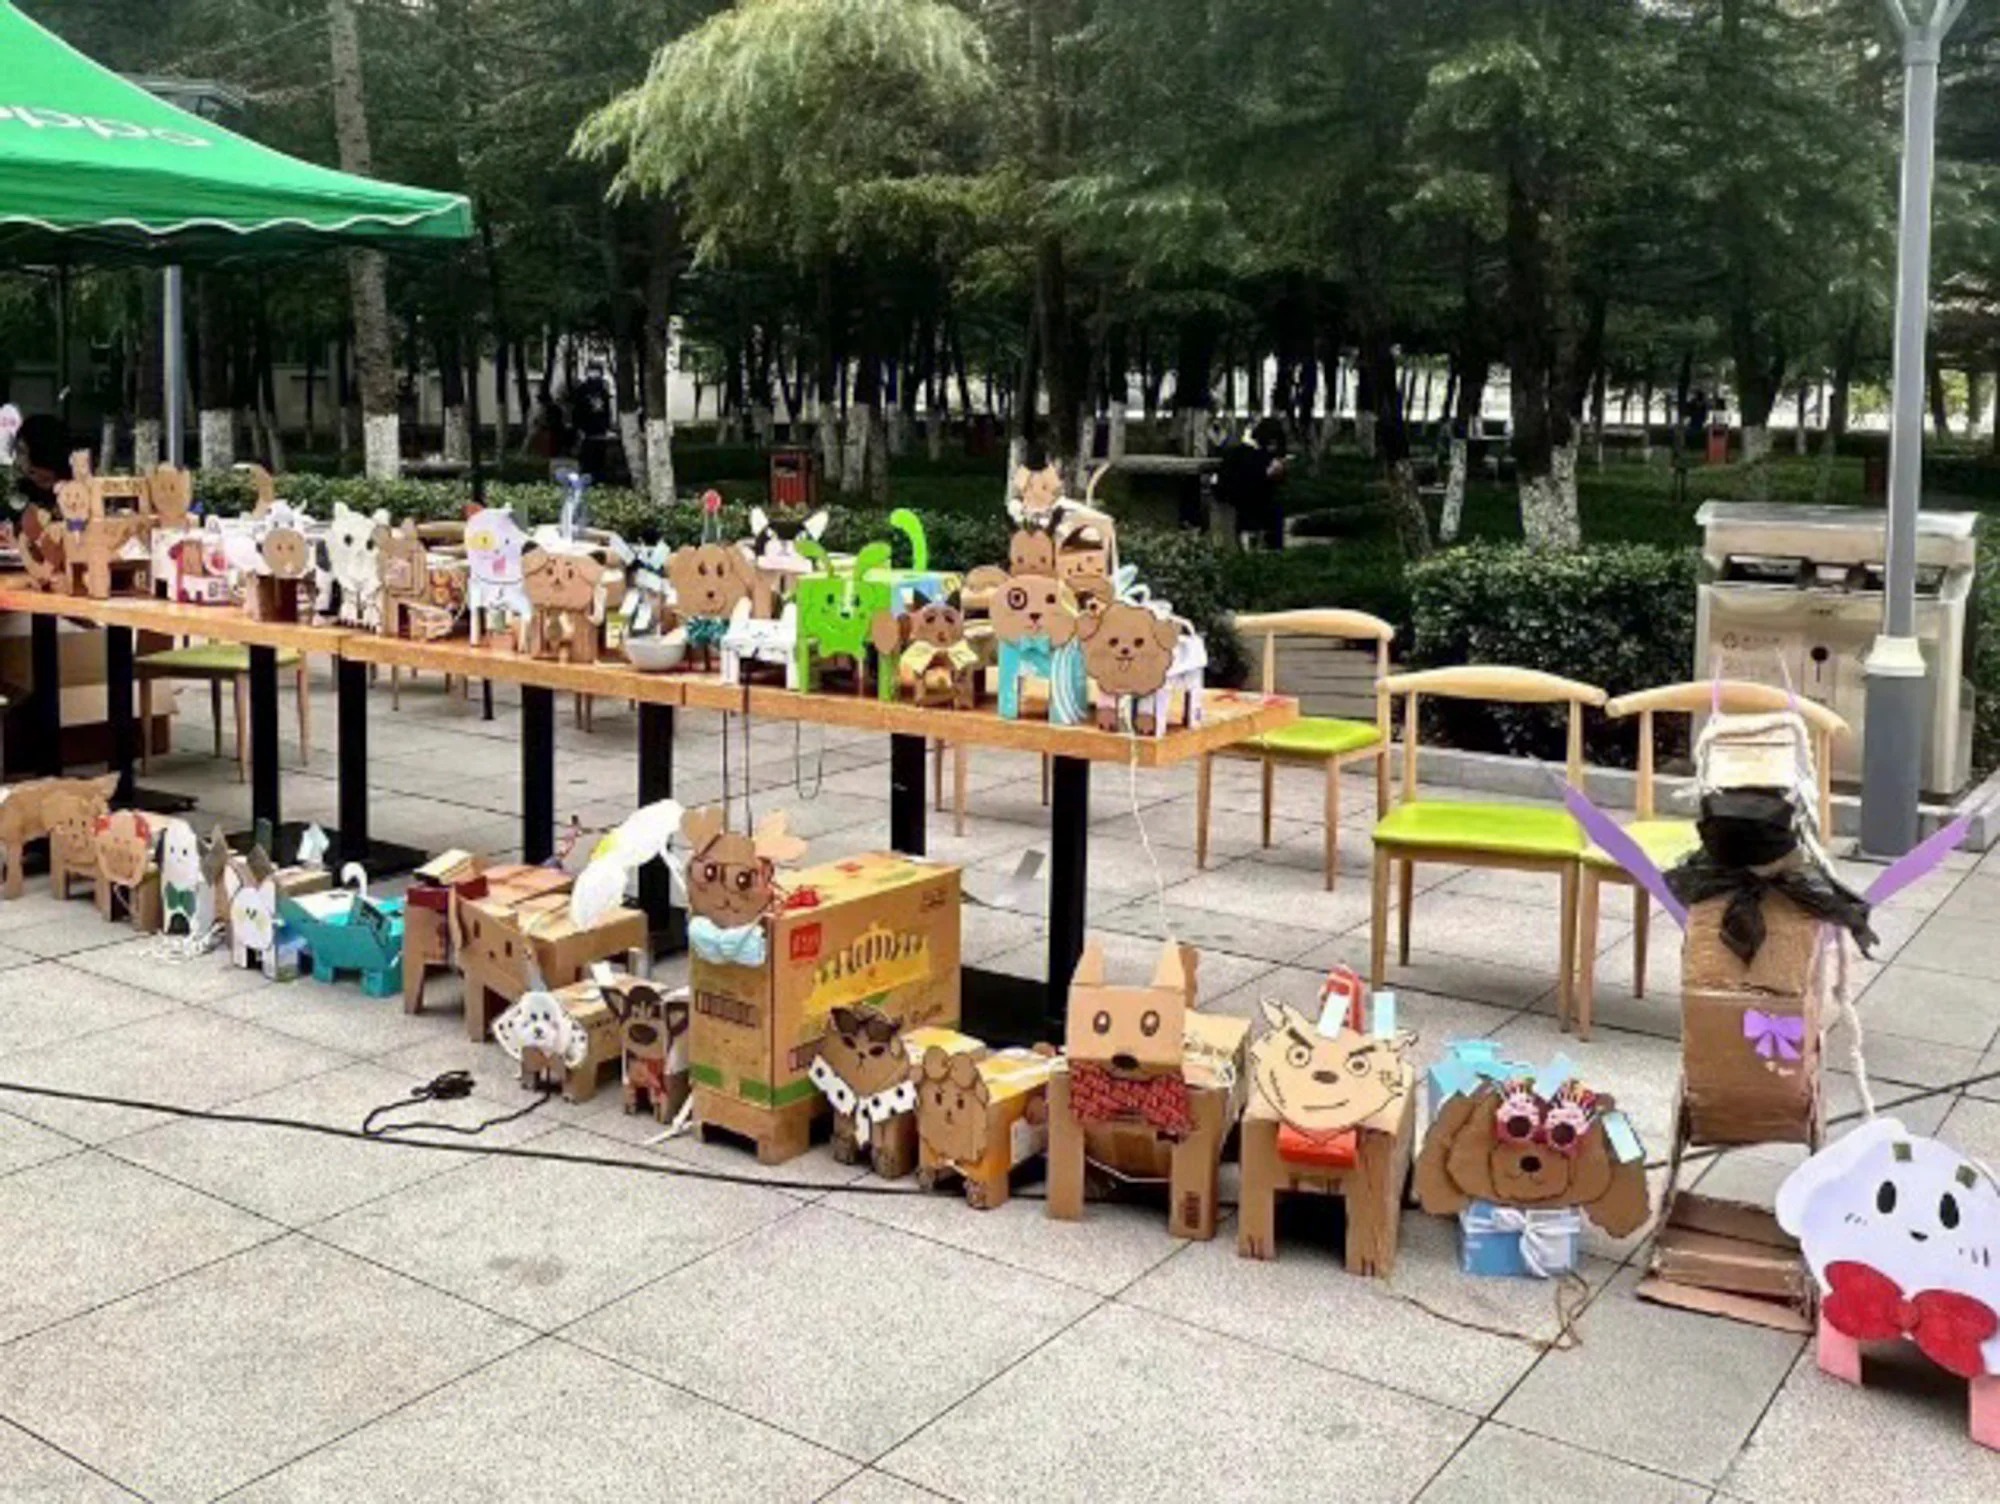 A photo of dozens of cardboard dogs lined up on the table or on the ground.